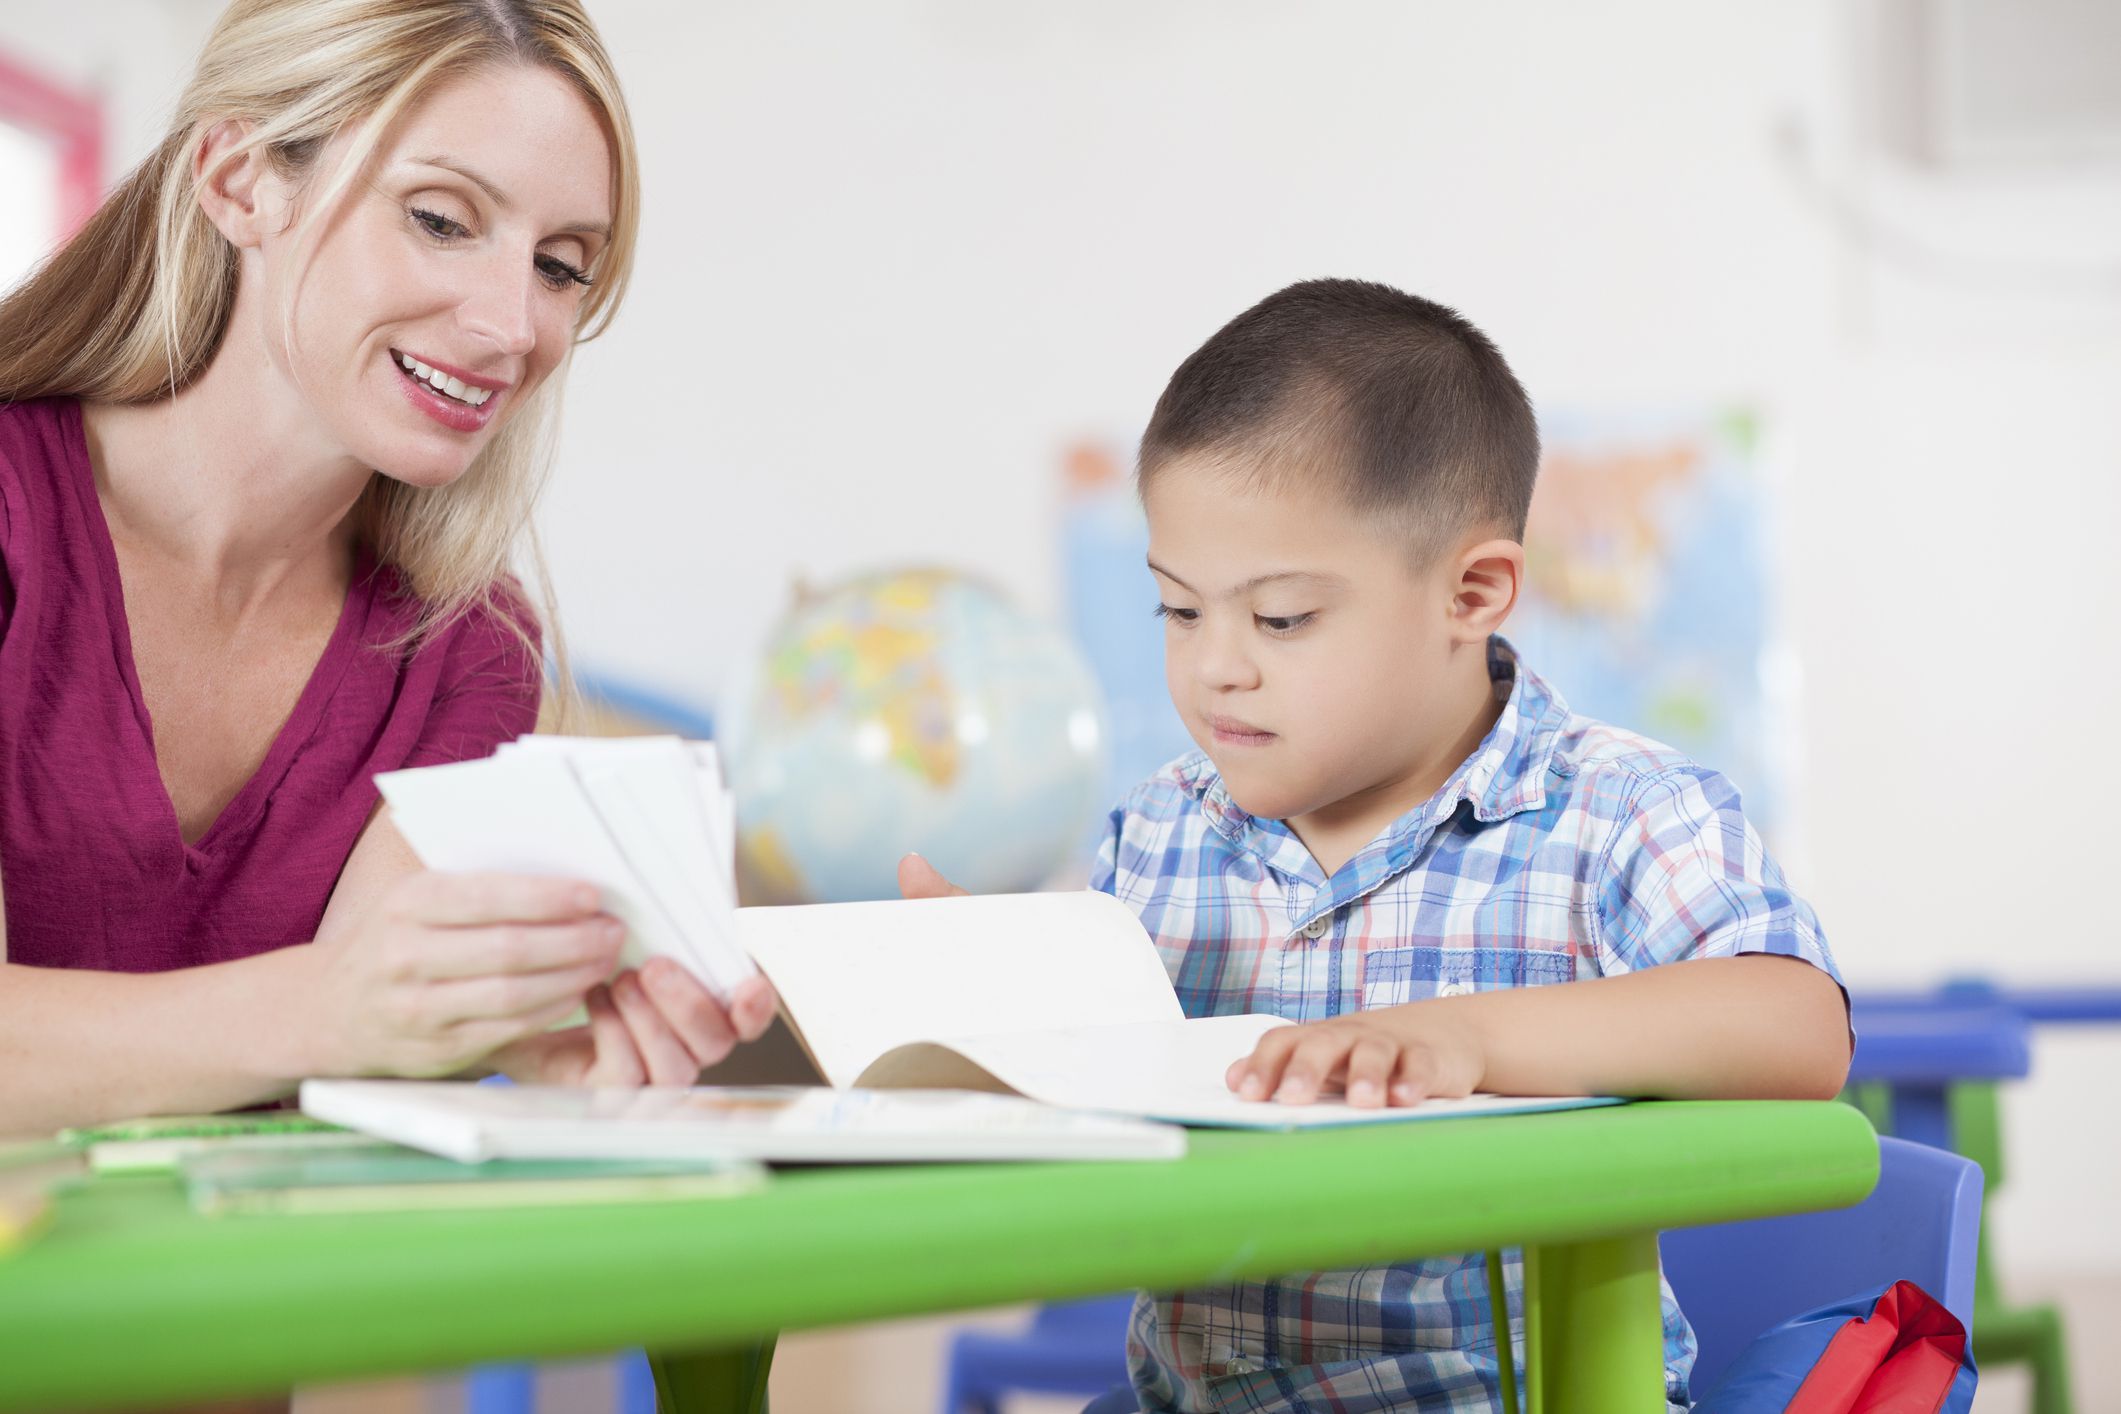 Importance Of Disabilities In The Classroom